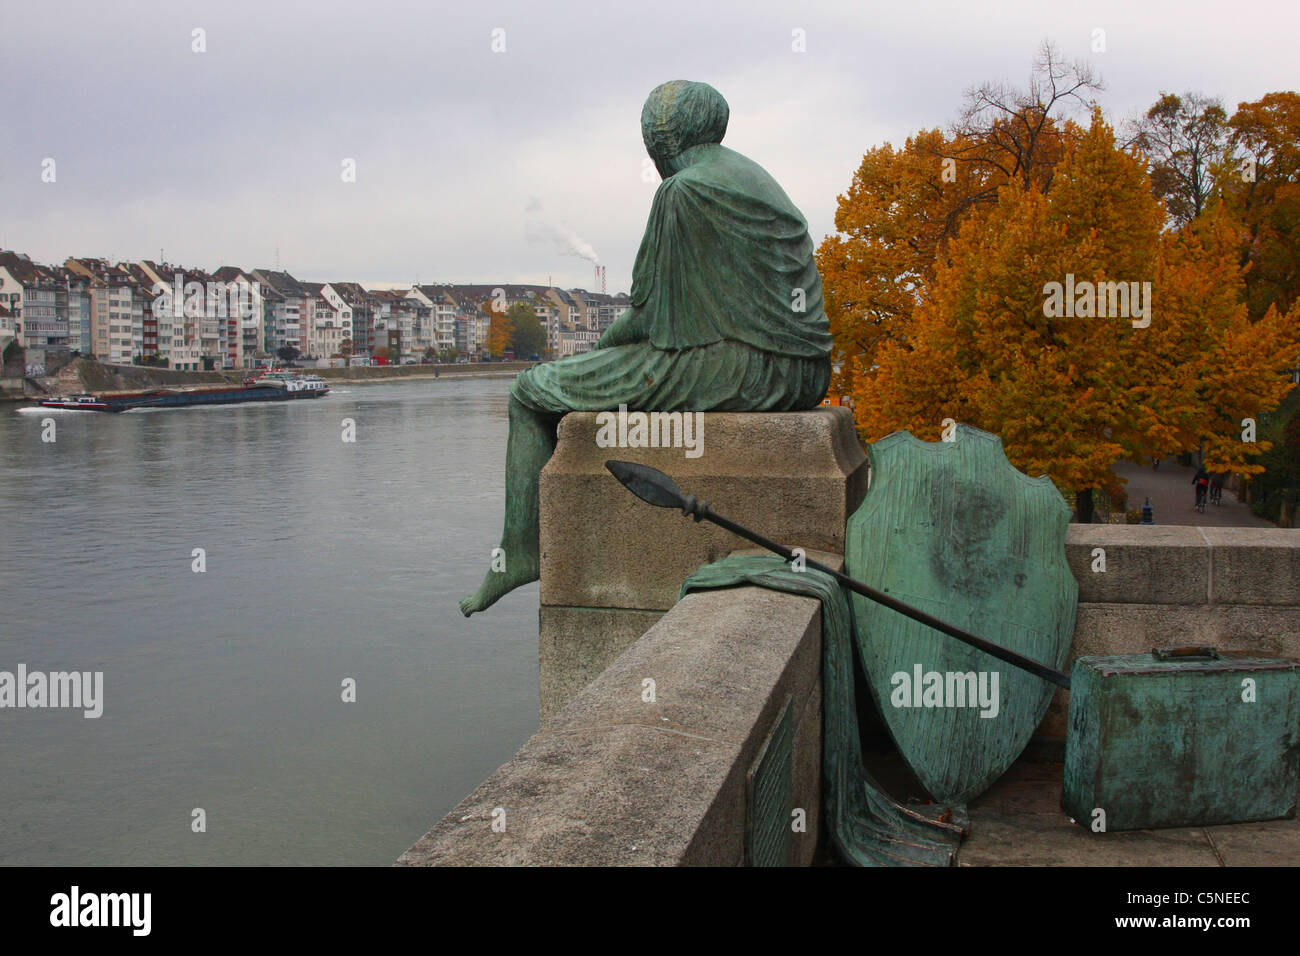 Statue of Mythical Figure Helvetia in Basel, Switzerland Stock Photo